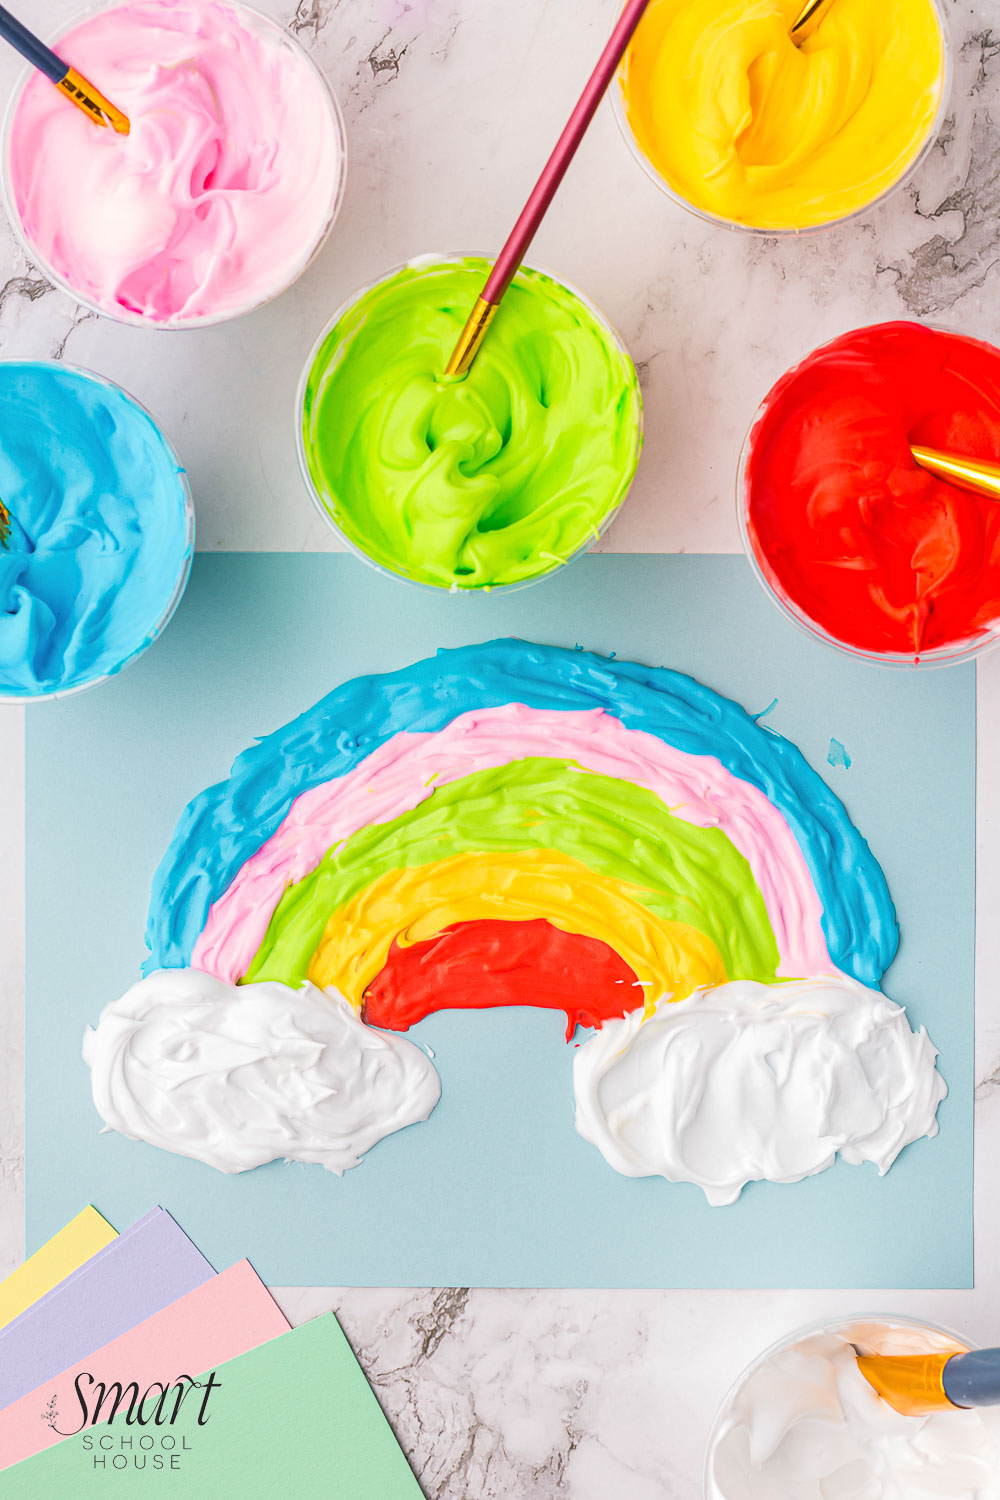 This fluffy paint mixture has a fun texture that stays puffy as it dries. Made with shaving cream, glue, and food coloring!